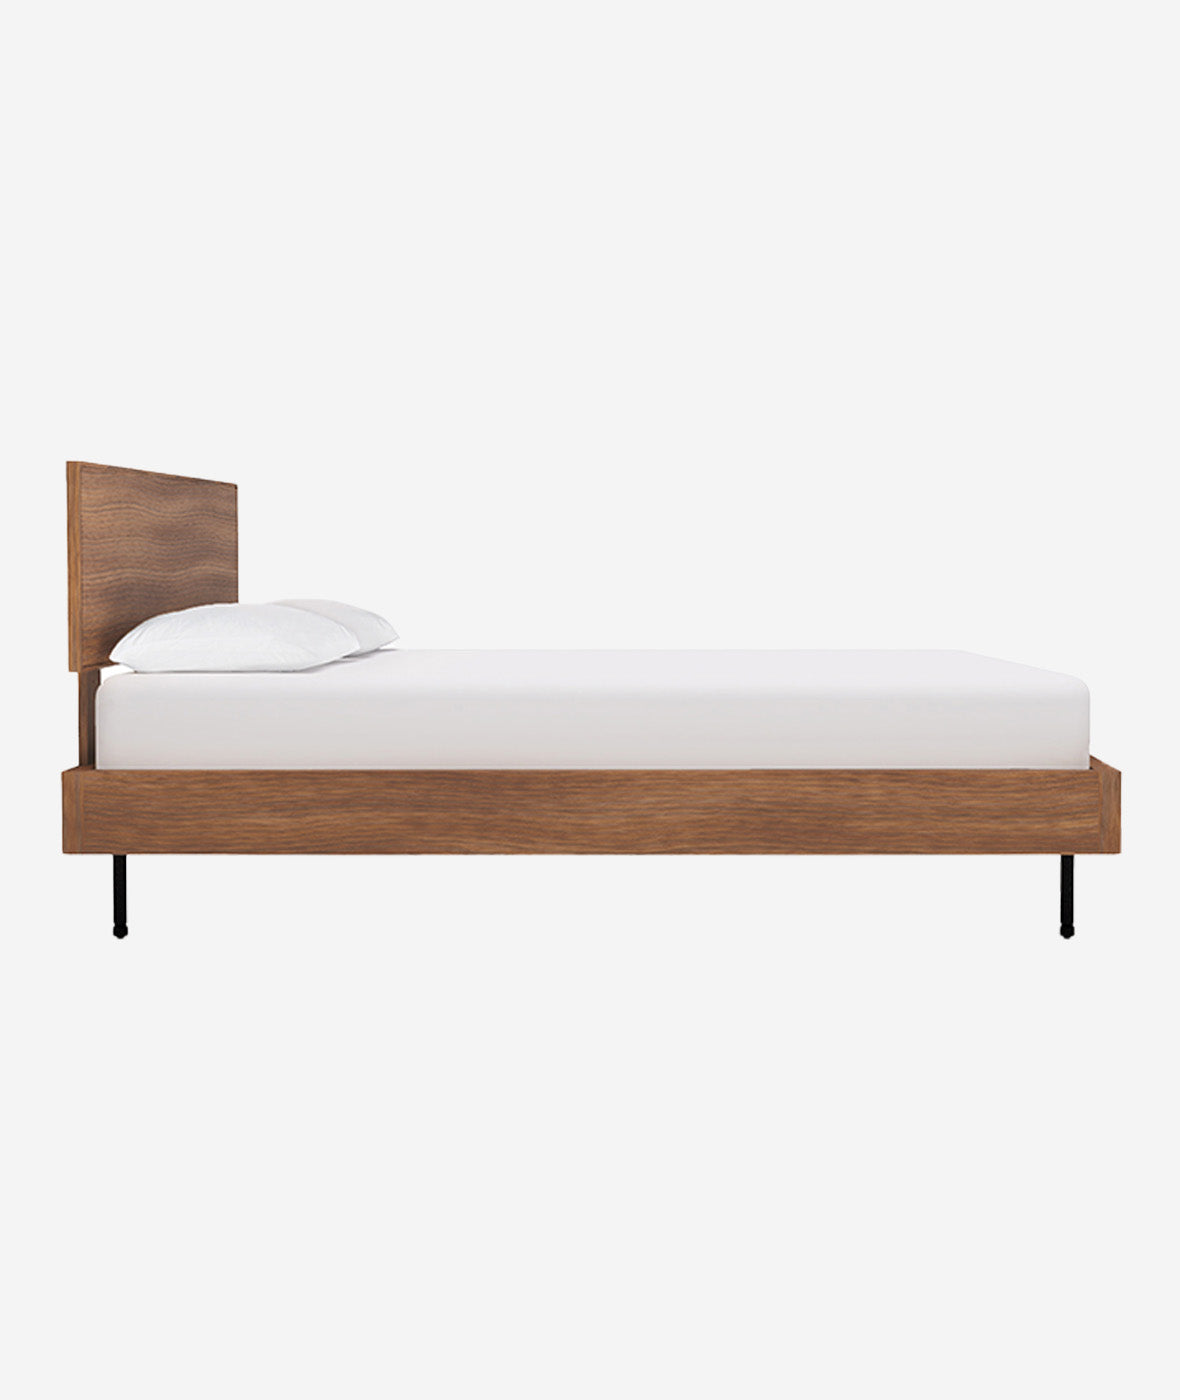 Munro Bed - More Options